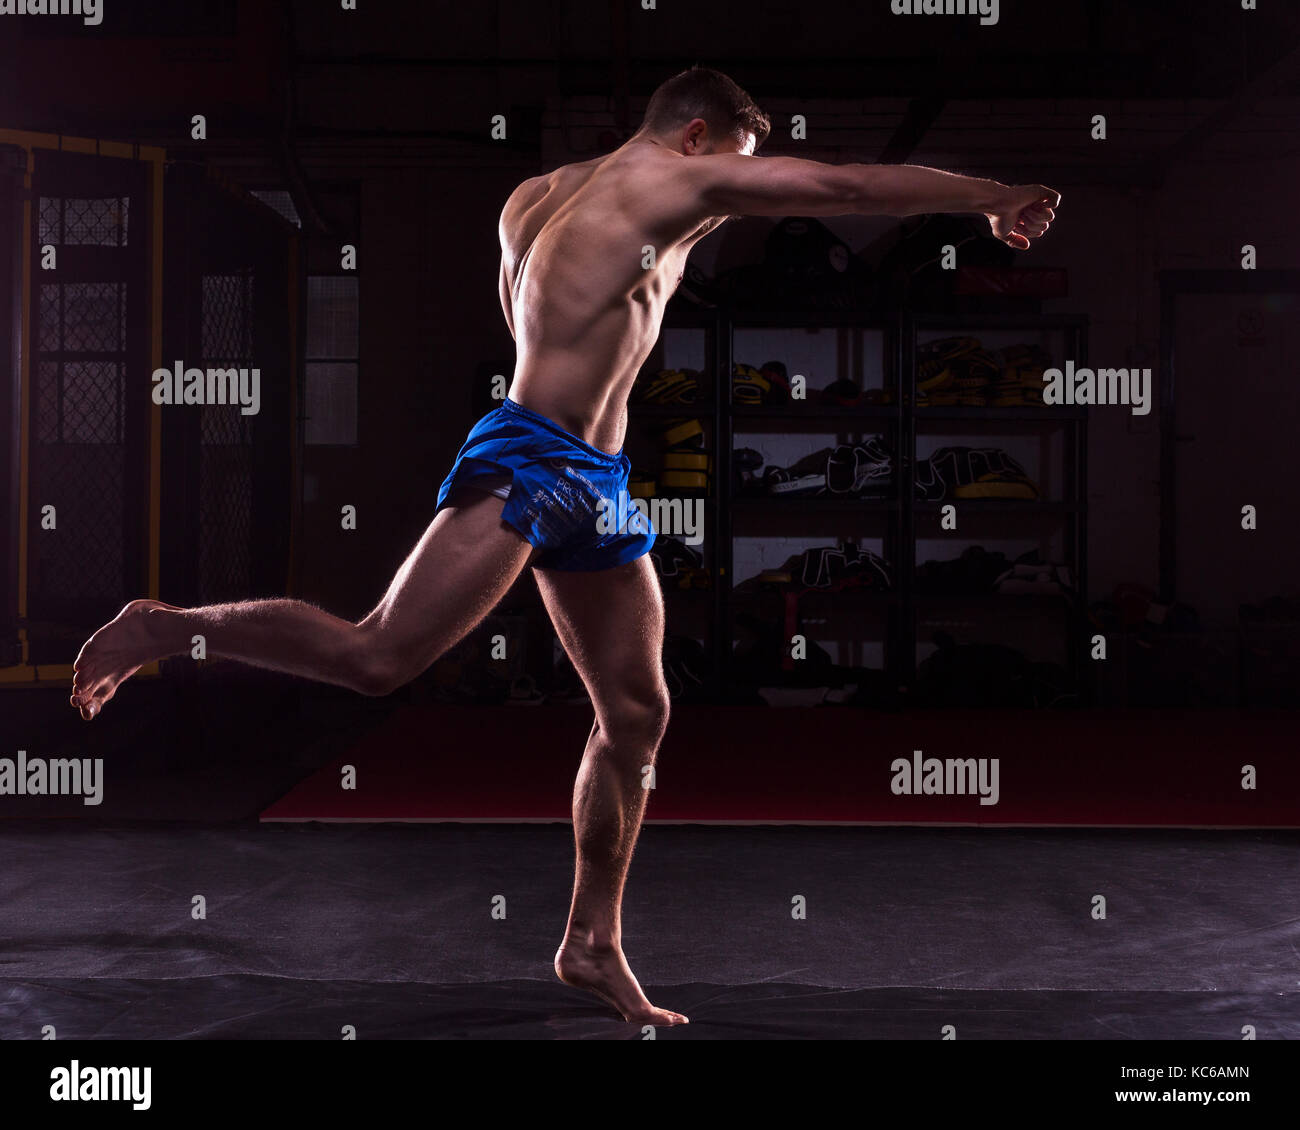 A male MMA fighter training kicks and punches in a dark gym Stock Photo